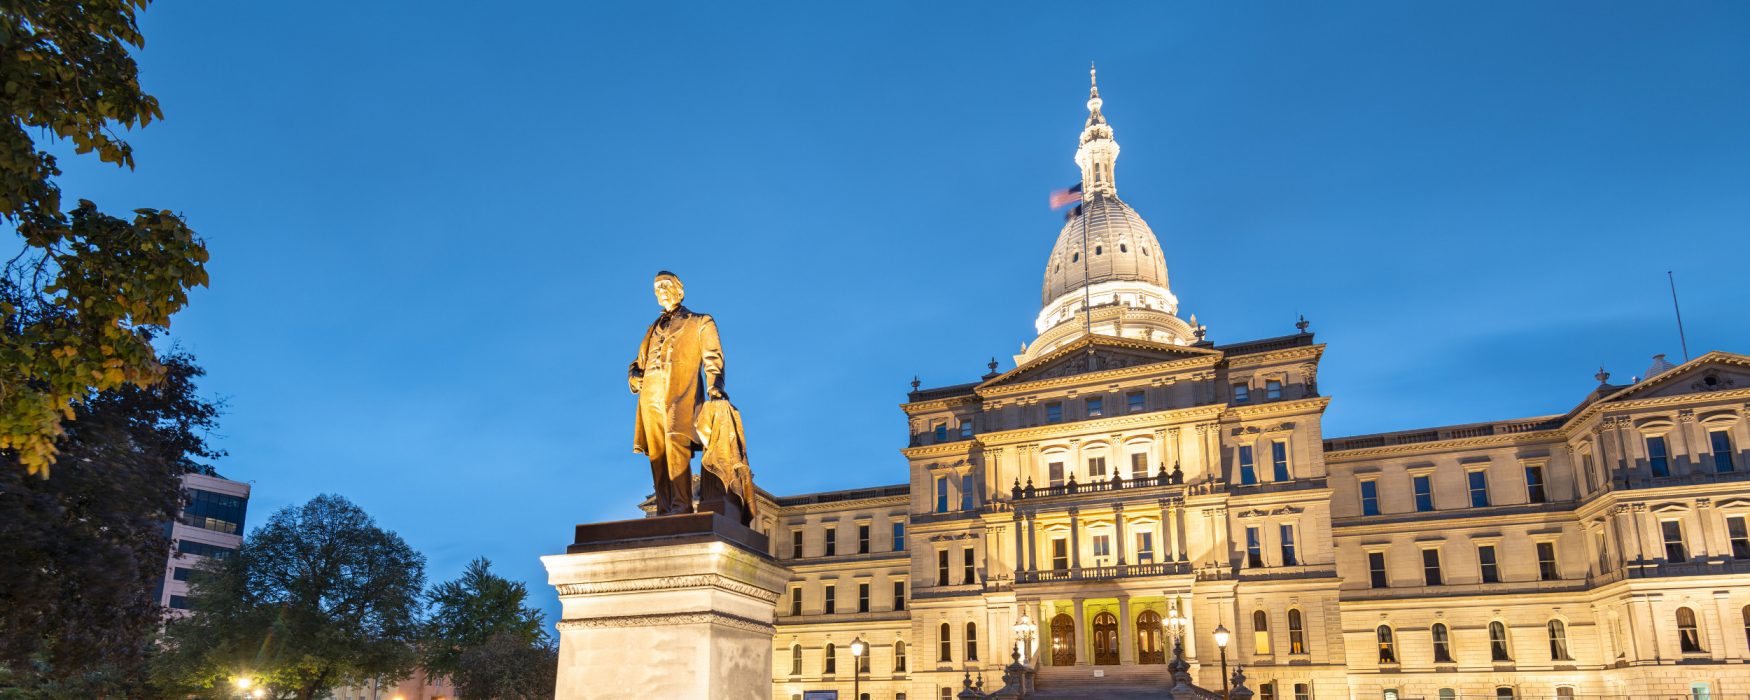 Image of Michigan's Capitol building in Lansing.